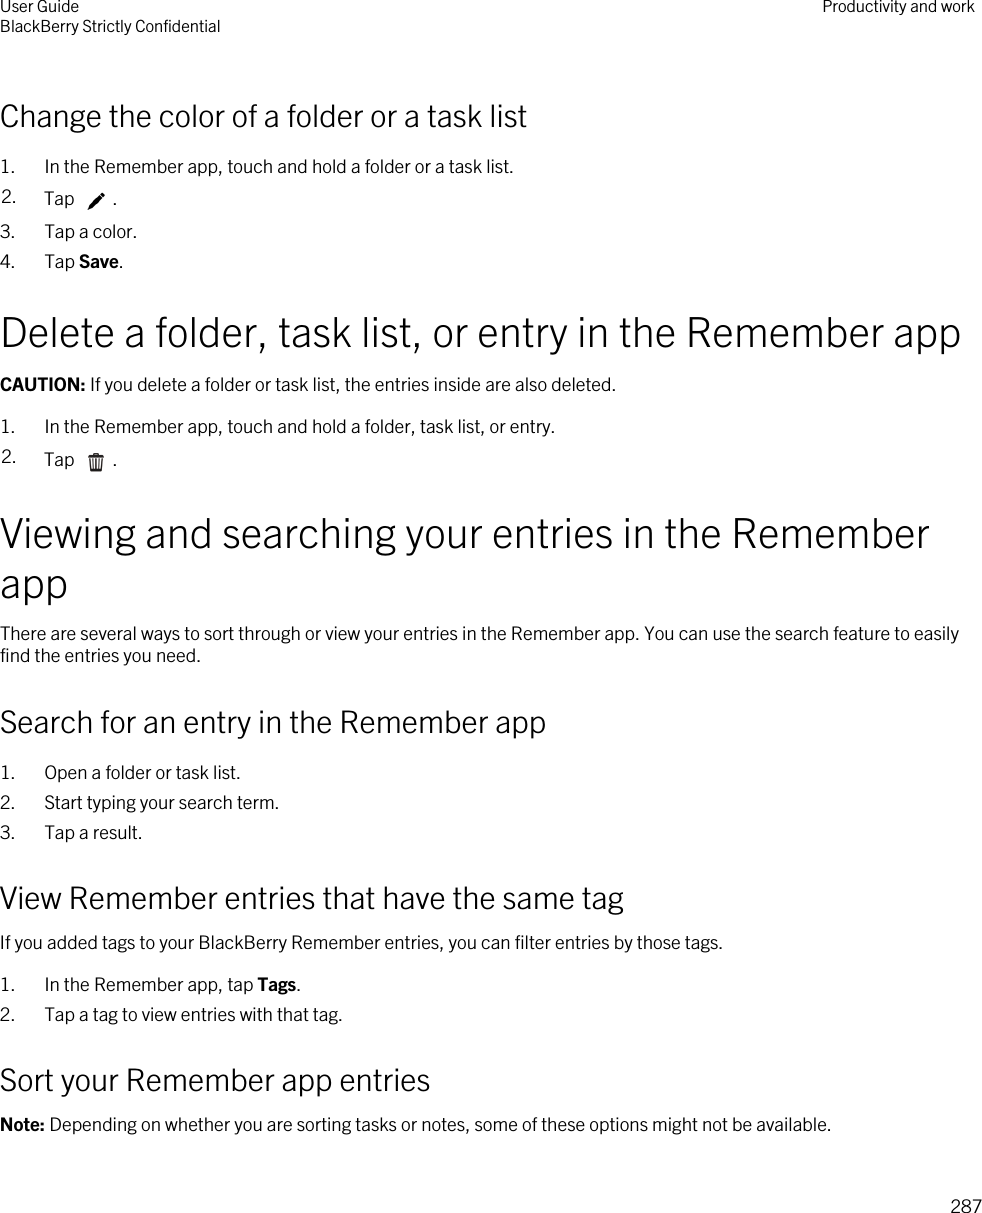 Change the color of a folder or a task list1. In the Remember app, touch and hold a folder or a task list.2. Tap  .3. Tap a color.4. Tap Save.Delete a folder, task list, or entry in the Remember appCAUTION: If you delete a folder or task list, the entries inside are also deleted.1. In the Remember app, touch and hold a folder, task list, or entry.2. Tap  .Viewing and searching your entries in the Remember appThere are several ways to sort through or view your entries in the Remember app. You can use the search feature to easily find the entries you need.Search for an entry in the Remember app1. Open a folder or task list.2. Start typing your search term.3. Tap a result.View Remember entries that have the same tagIf you added tags to your BlackBerry Remember entries, you can filter entries by those tags.1. In the Remember app, tap Tags.2. Tap a tag to view entries with that tag.Sort your Remember app entriesNote: Depending on whether you are sorting tasks or notes, some of these options might not be available.User GuideBlackBerry Strictly Confidential Productivity and work287